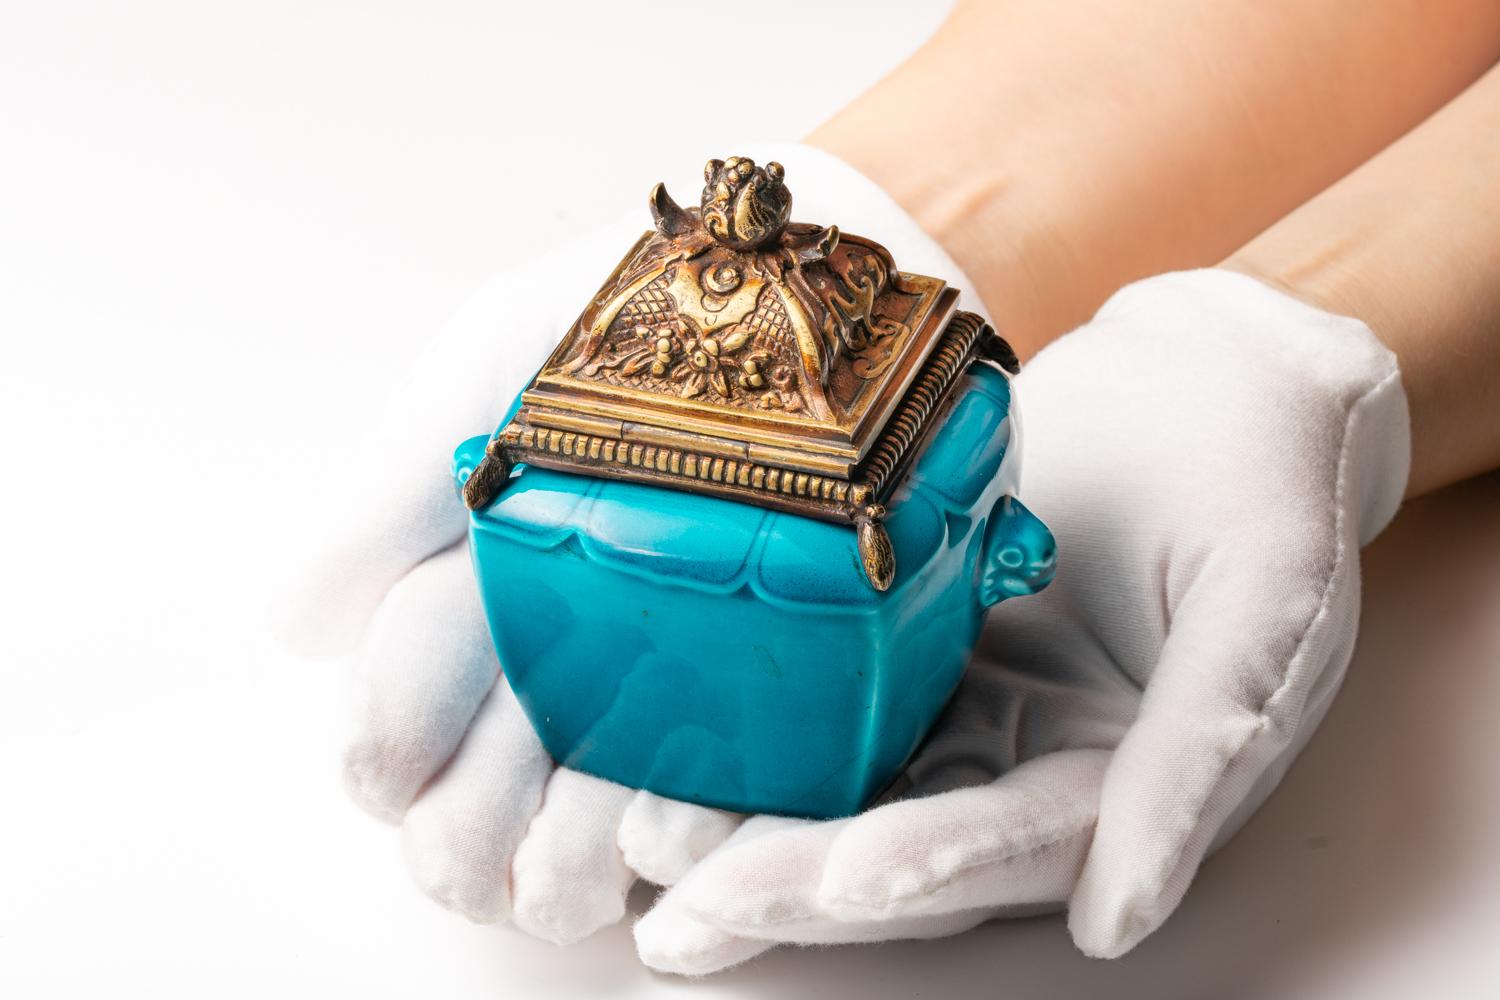 This 19th century blue enamelled earthenware inkwell was made circa 1880 by famous French ceramic artist Théodore Deck. Deck was well-known for the glazes that he developed, especially a rich turquoise blue that became known in French as 'Bleu de